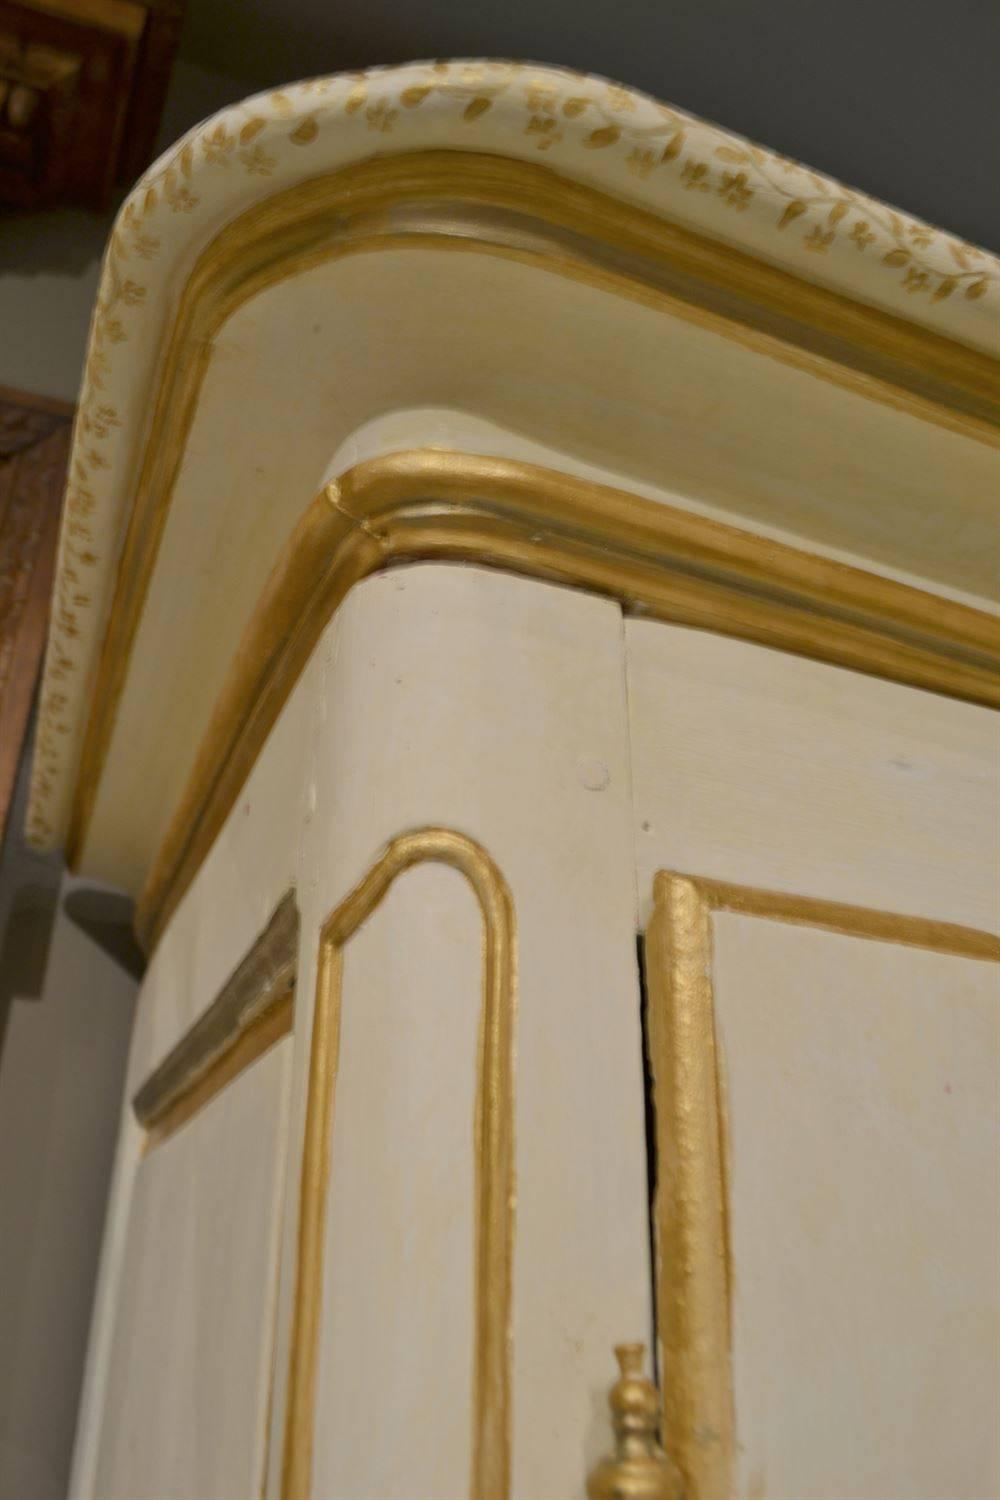 This early 19th century oak armoire features a recent decorative painted finish. The designs were done in metallic gold and silver paints, and the cabinet has been distressed and glazed to look old. The piece has wear typical of its age and the